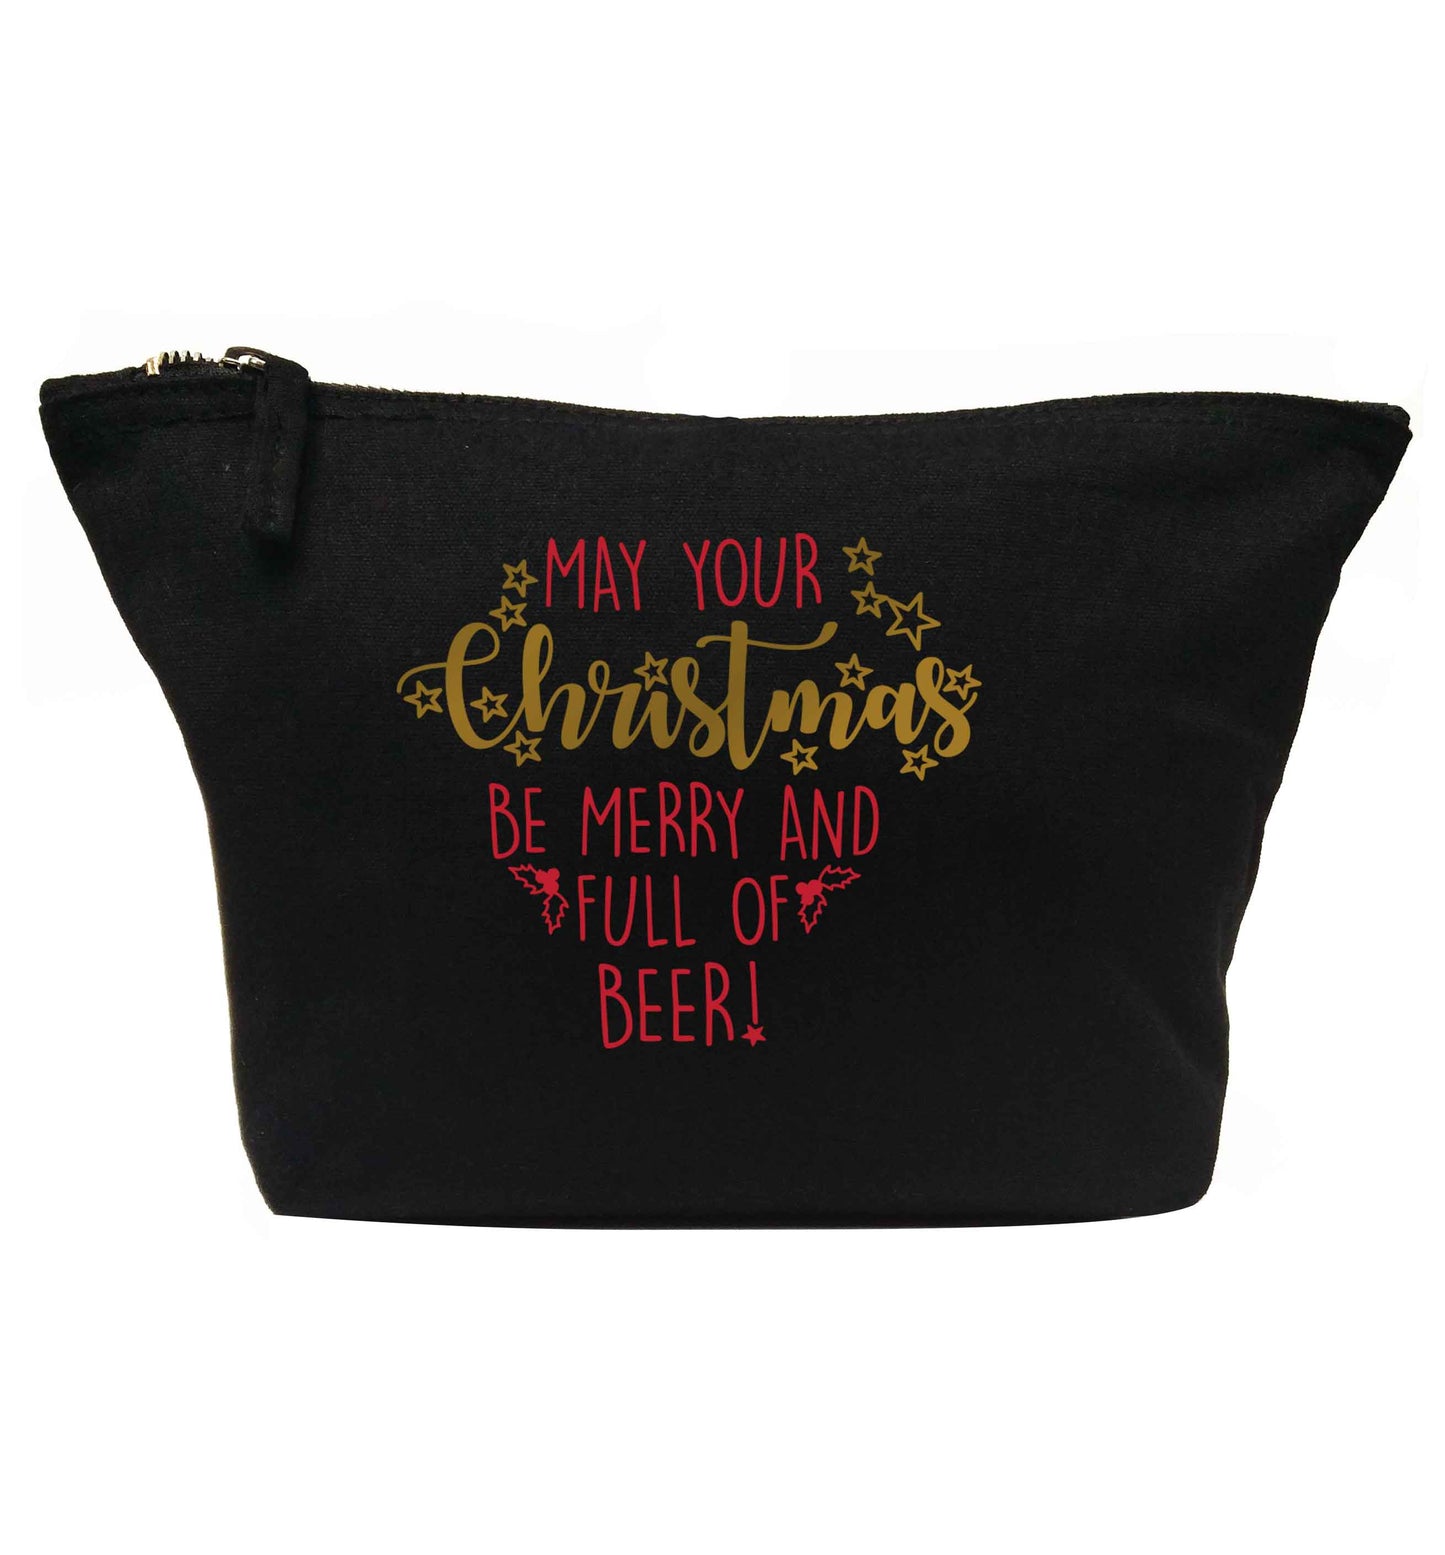 May your Christmas be merry and full of beer | makeup / wash bag